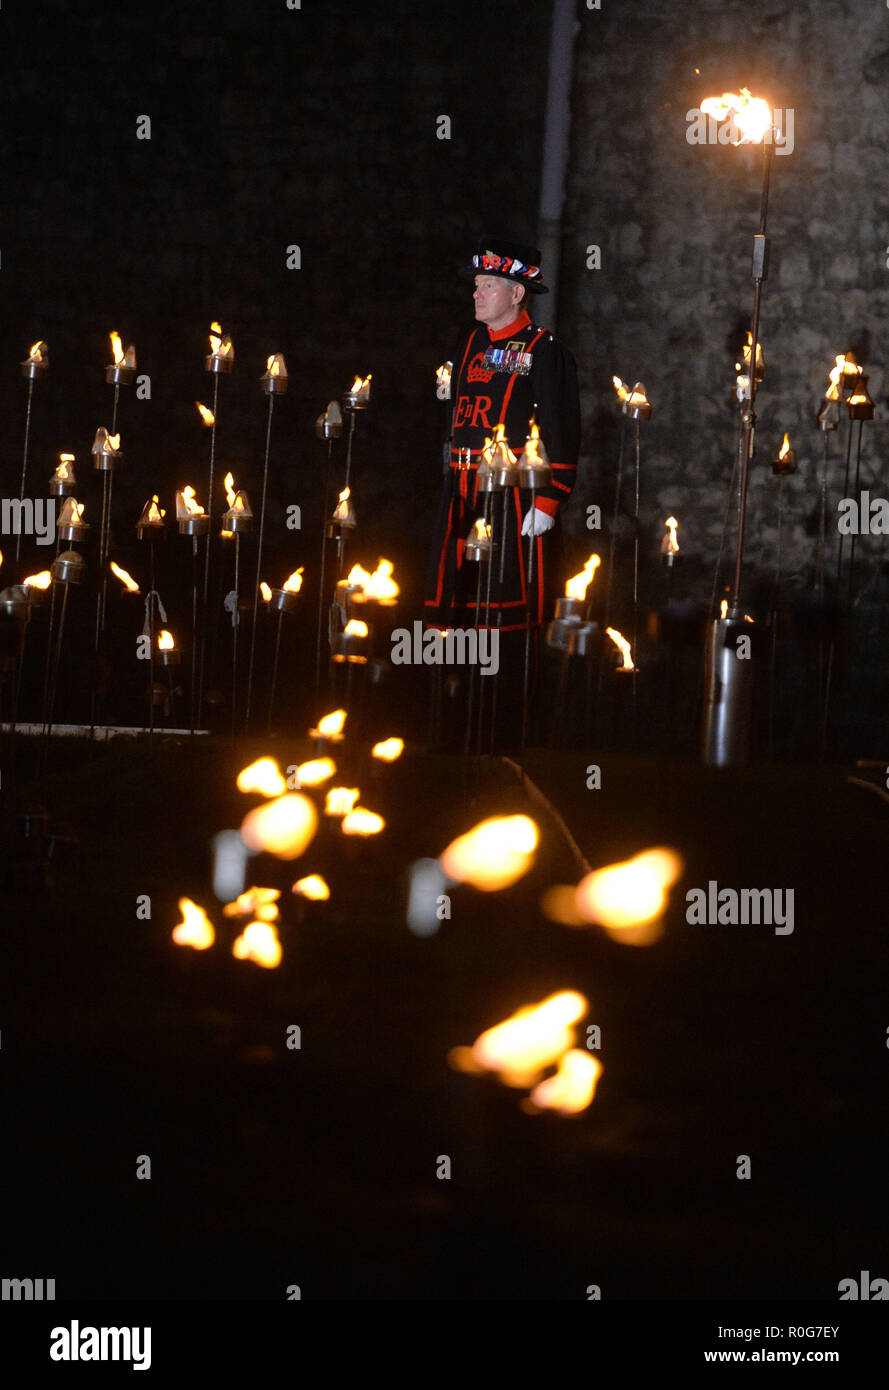 Yeoman Warders ('Beefeaters') lighting the first of thousands of flames in a lighting ceremony in the dry moat of the Tower of London as part of an installation called Beyond the Deepening Shadow: The Tower Remembers, to mark the centenary of the end of First World War. Stock Photo